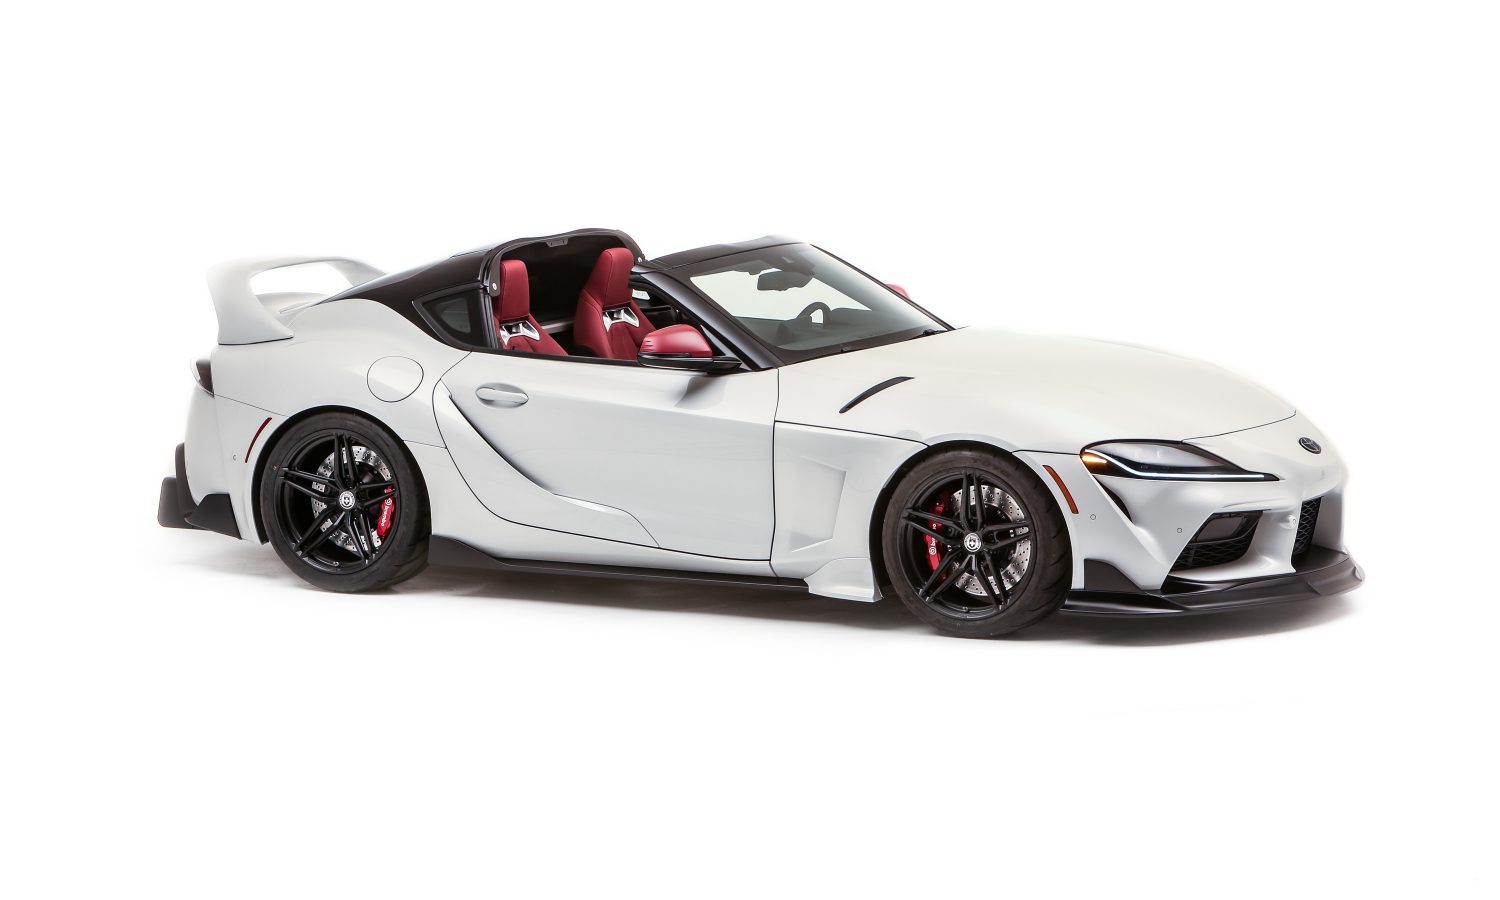 GR Supra Sport Top Blows the Roof Off the Competition - Toyota USA Newsroom